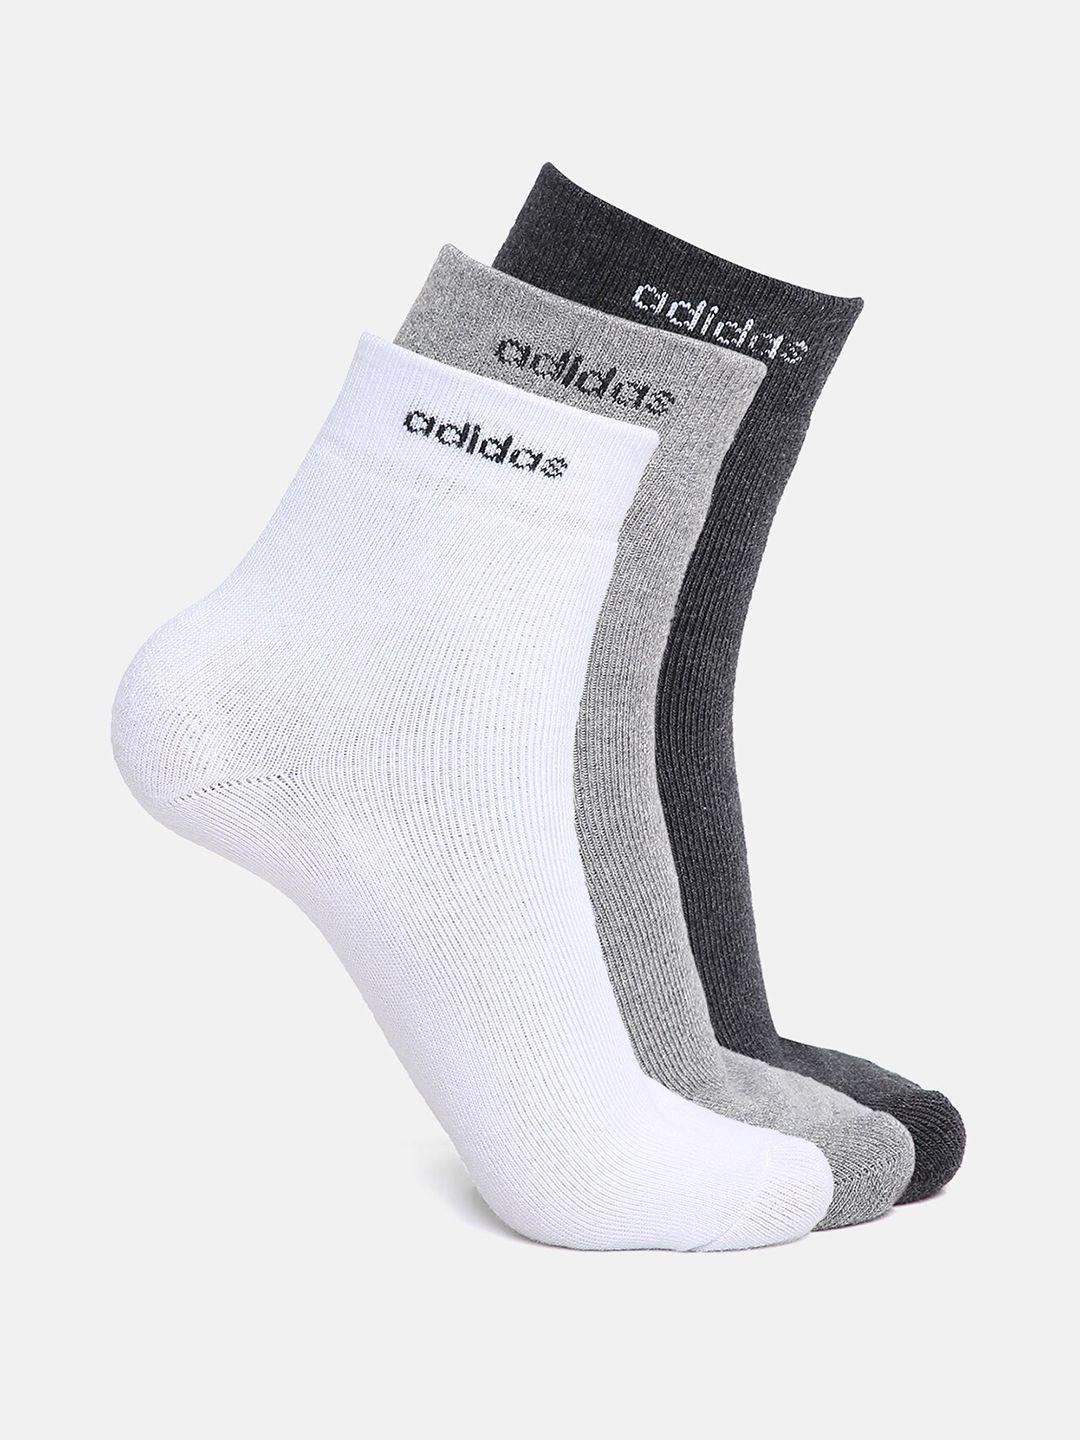 adidas men pack of 3 grey & charcoal solid ankle-length socks